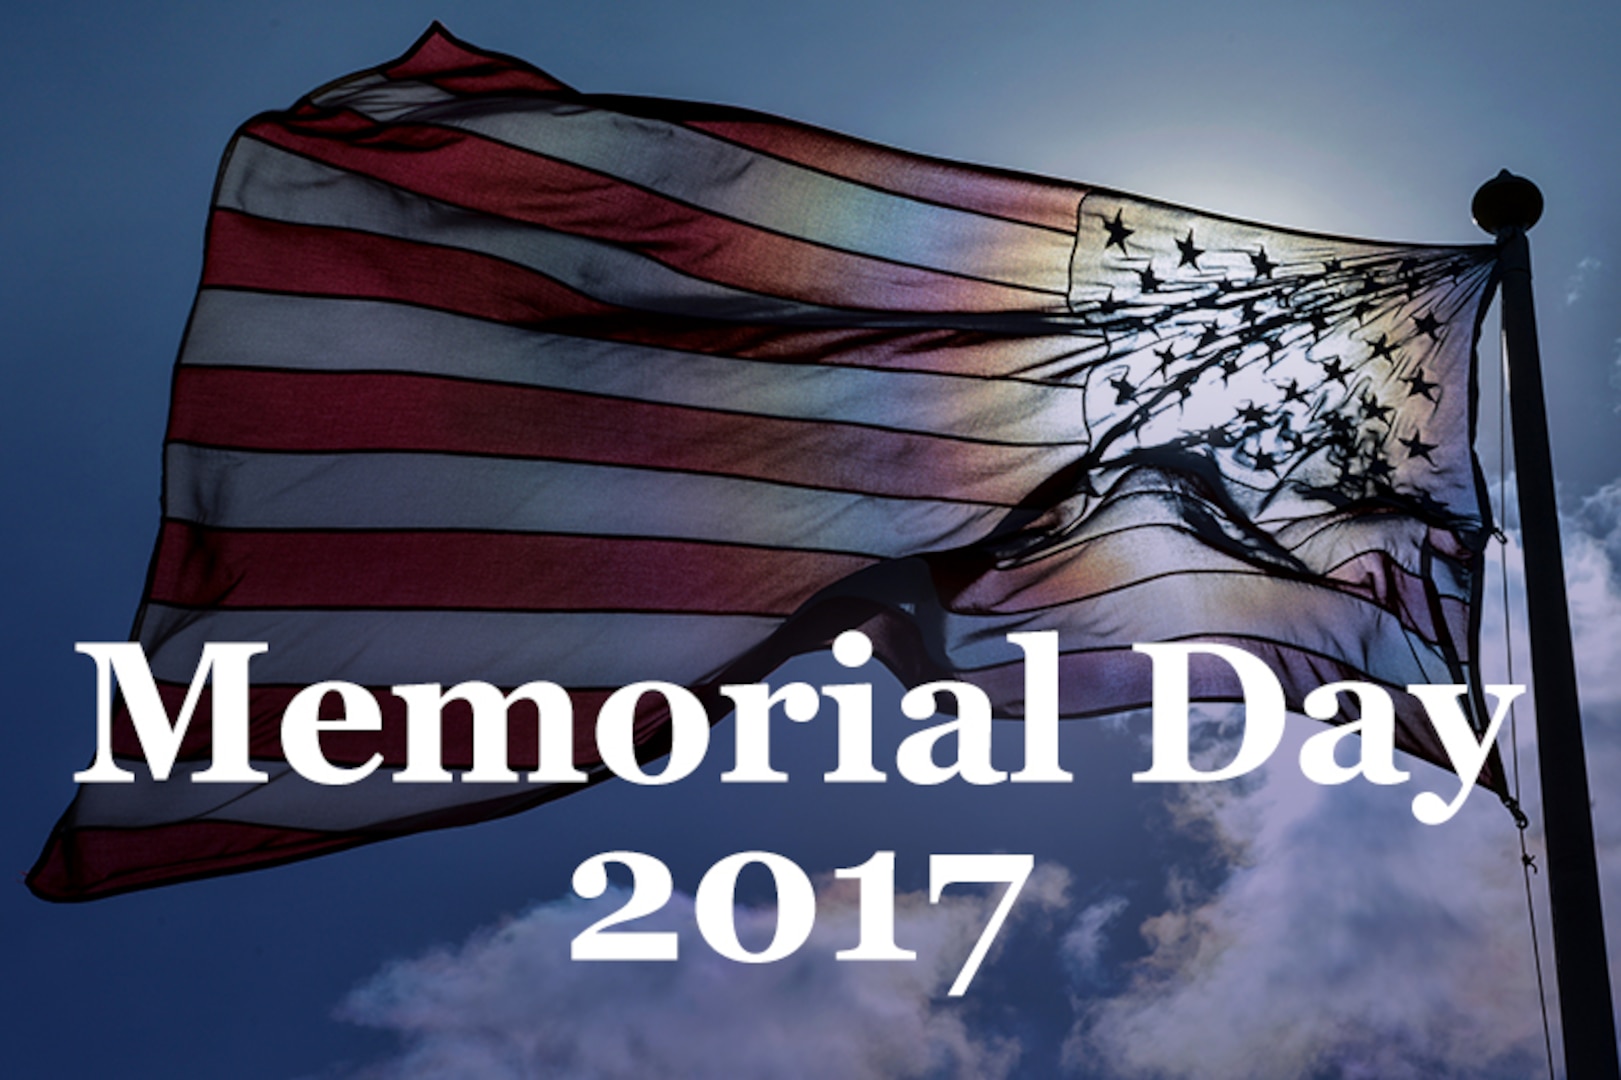 On Memorial Day, we pause as a nation to honor those who died while defending America's freedom. The Defense Department joins Americans around the world in remembering and honoring their sacrifice. Click to learn more in the Defense.gov special report: Memorial Day 2017.